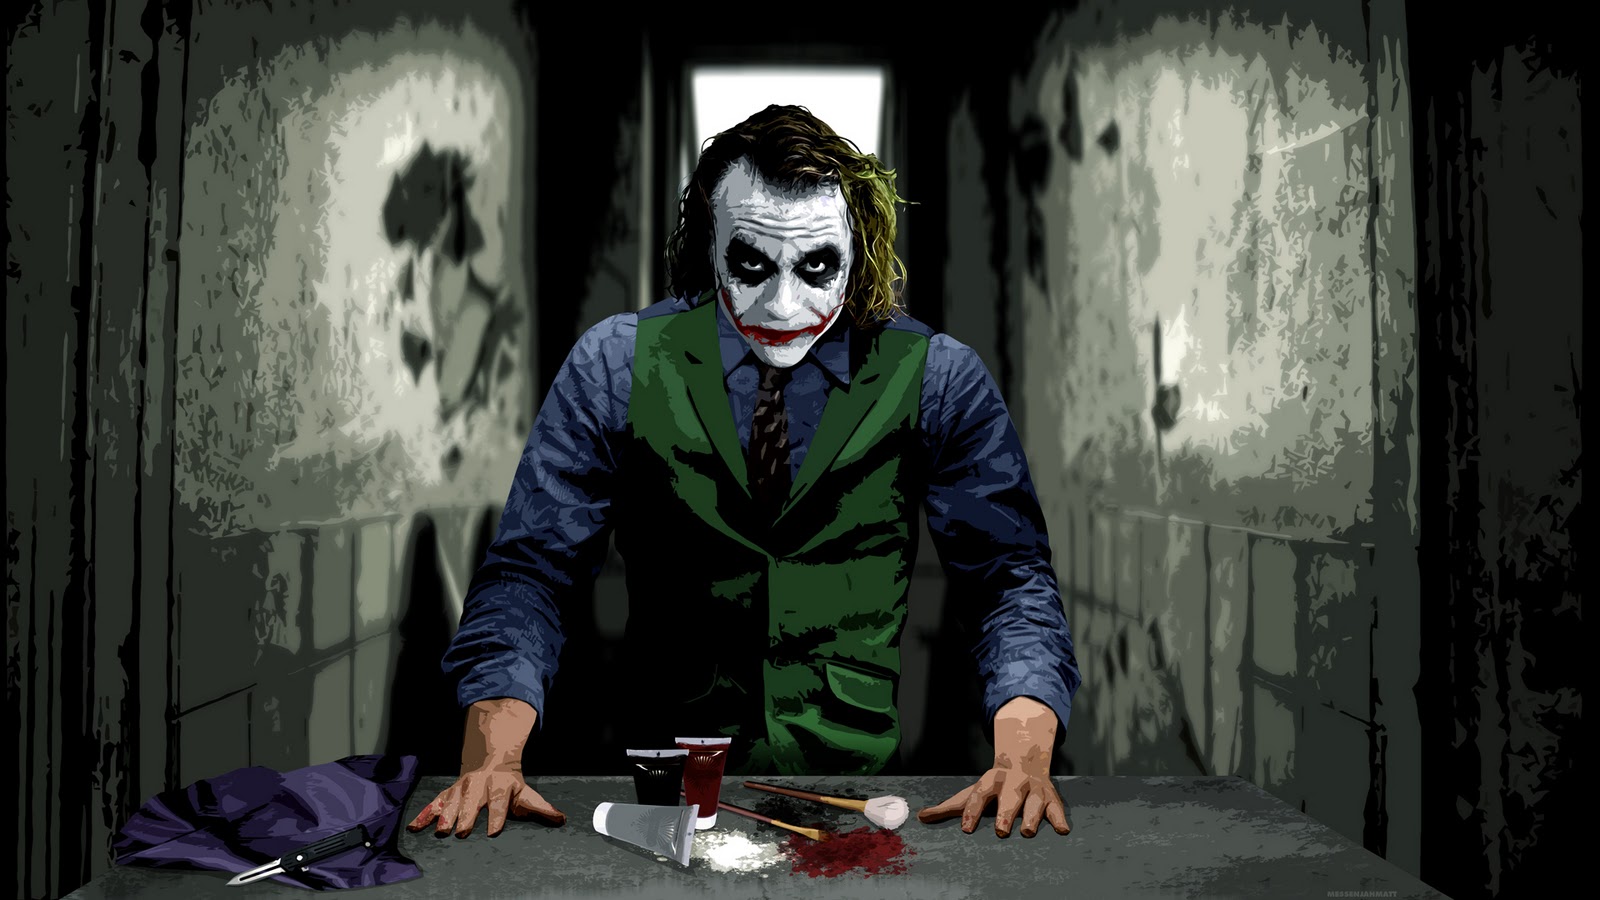 Wallpaper A Day Joker Do You Want To See Magic Trick